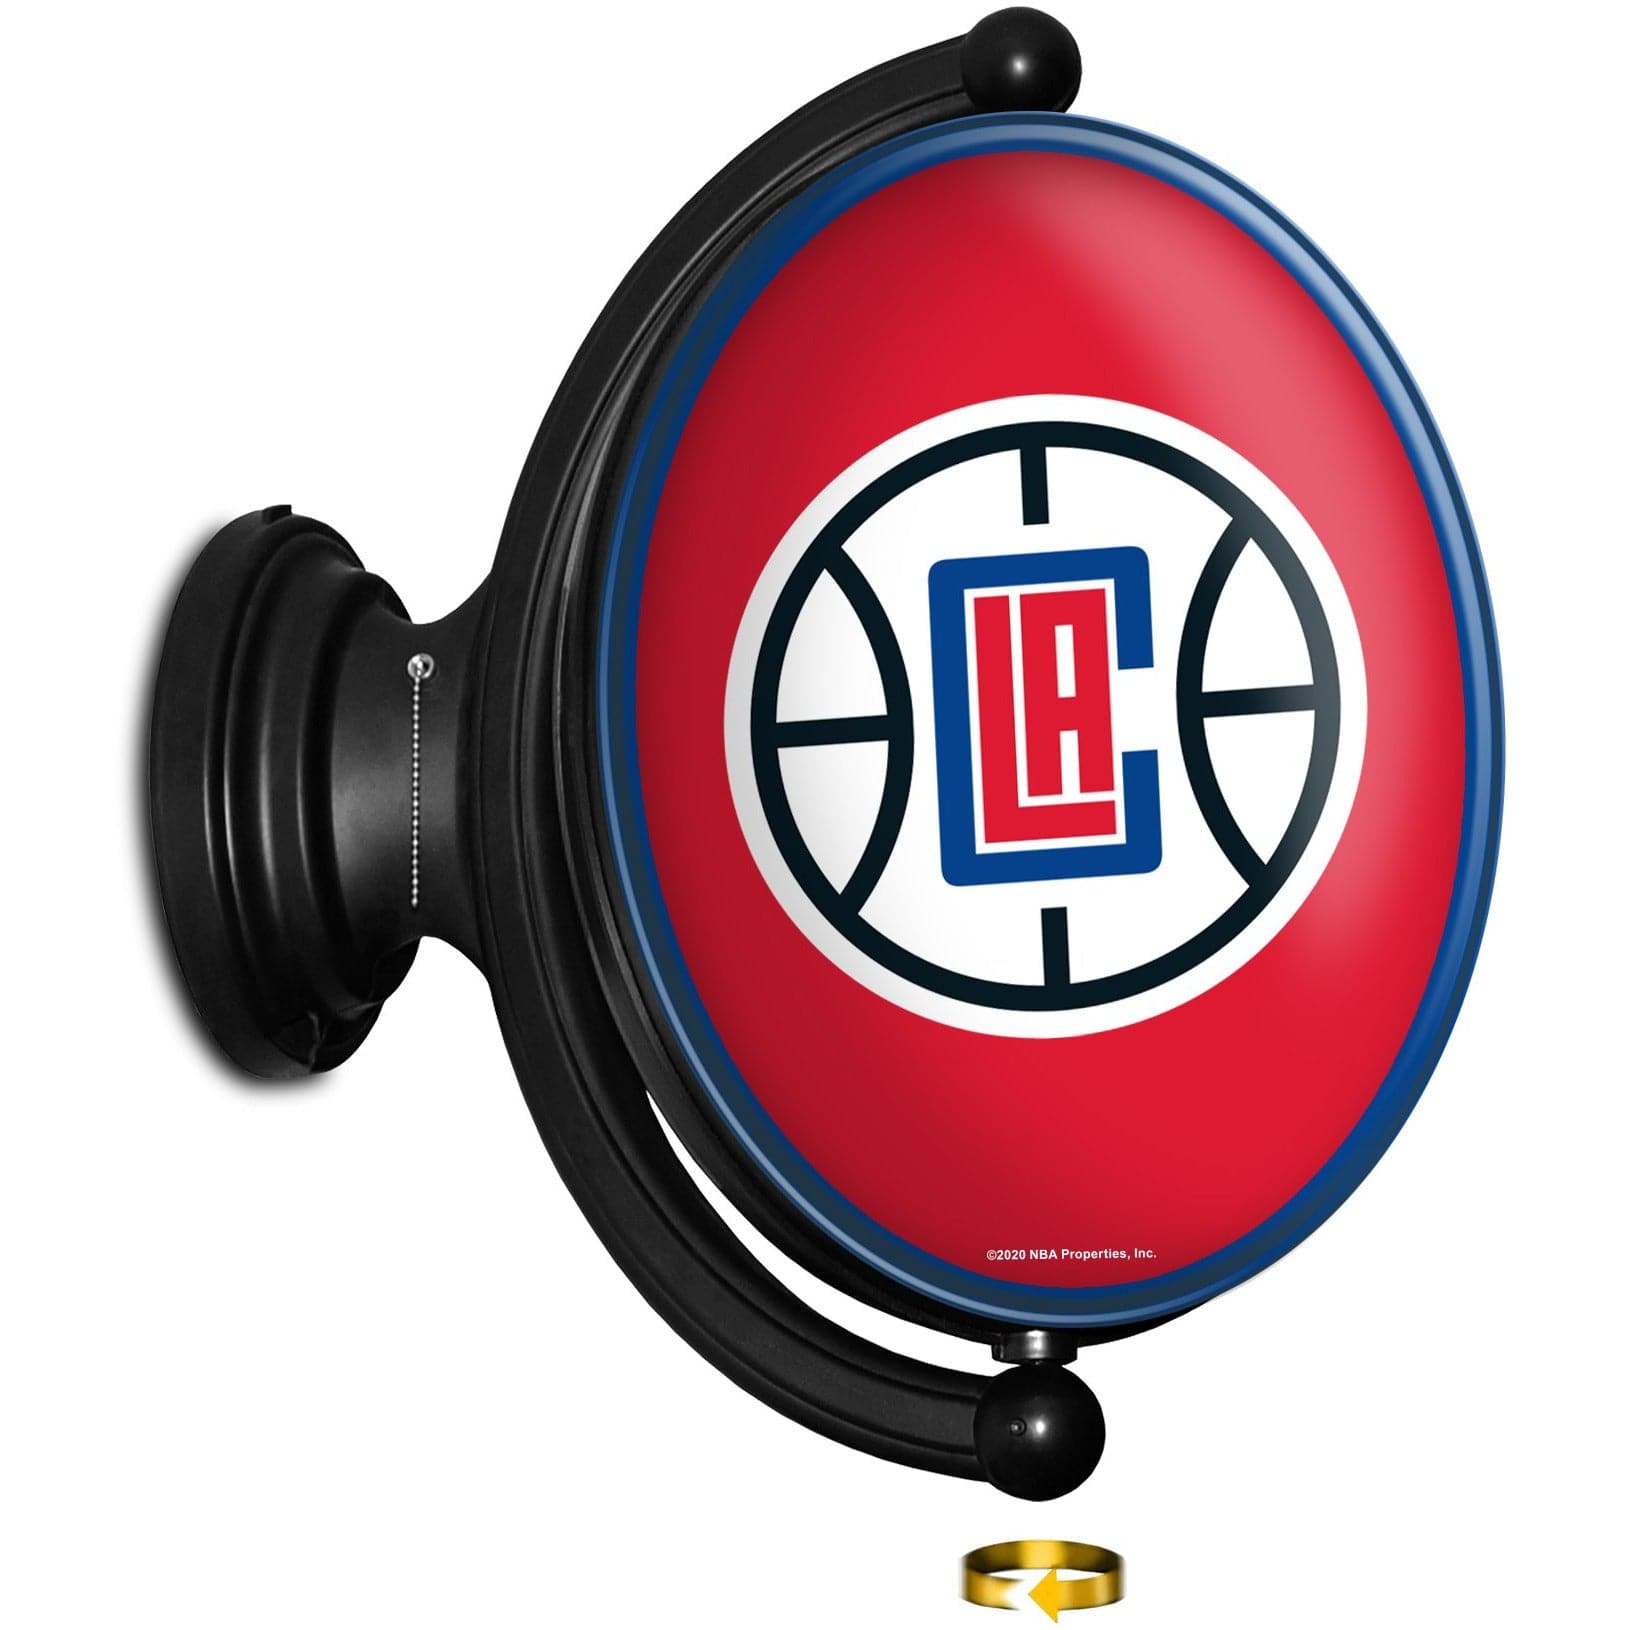 Los Angeles Clippers: Original Oval Rotating Lighted Wall Sign - The Fan-Brand